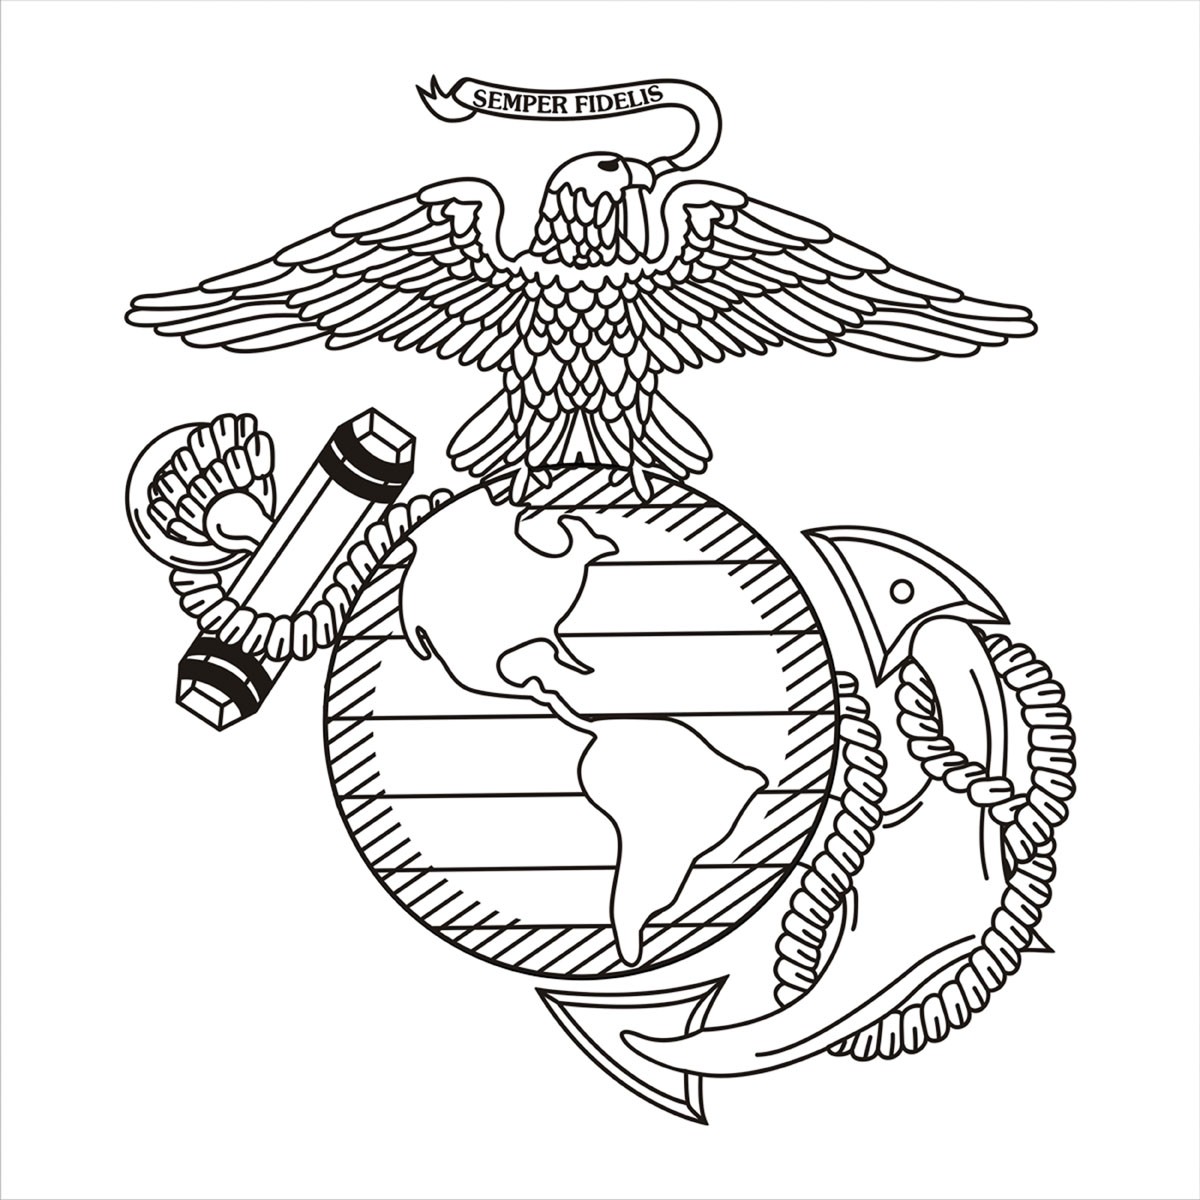 12" Black Right Eagle, Globe, and Anchor Decal | Sgt Grit - Marine ...